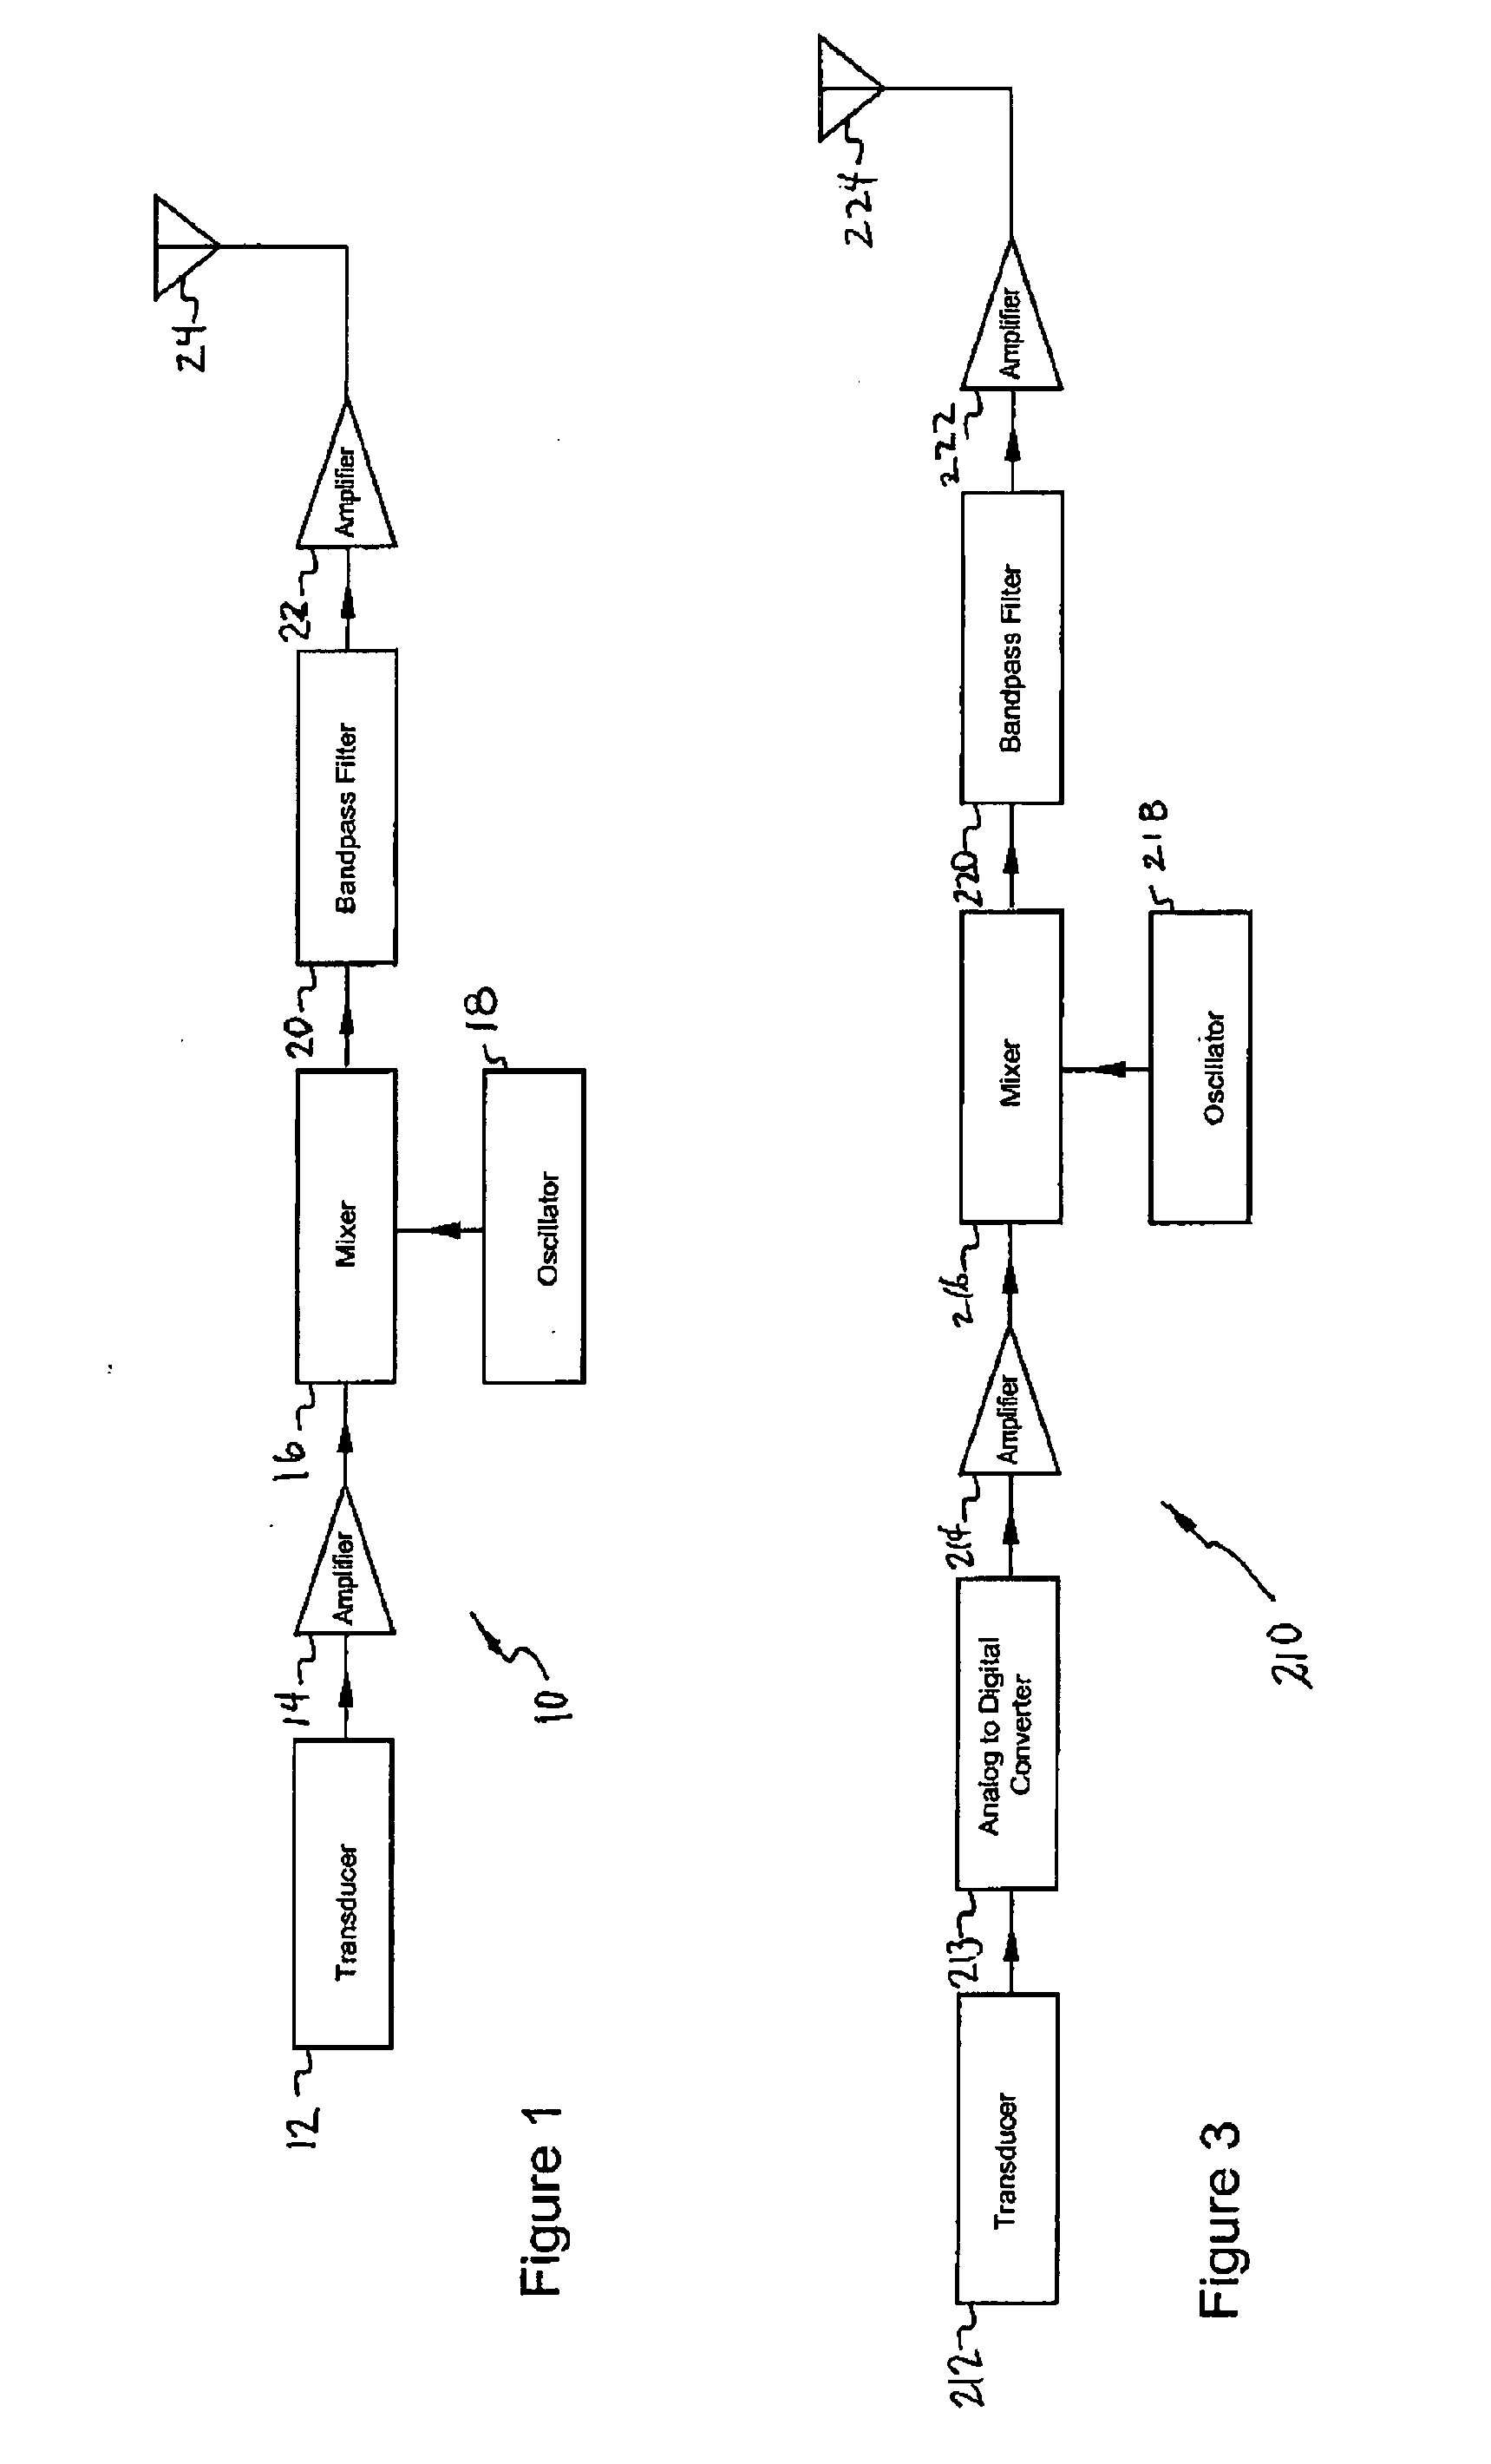 System and method for facial nerve monitoring during facial surgery